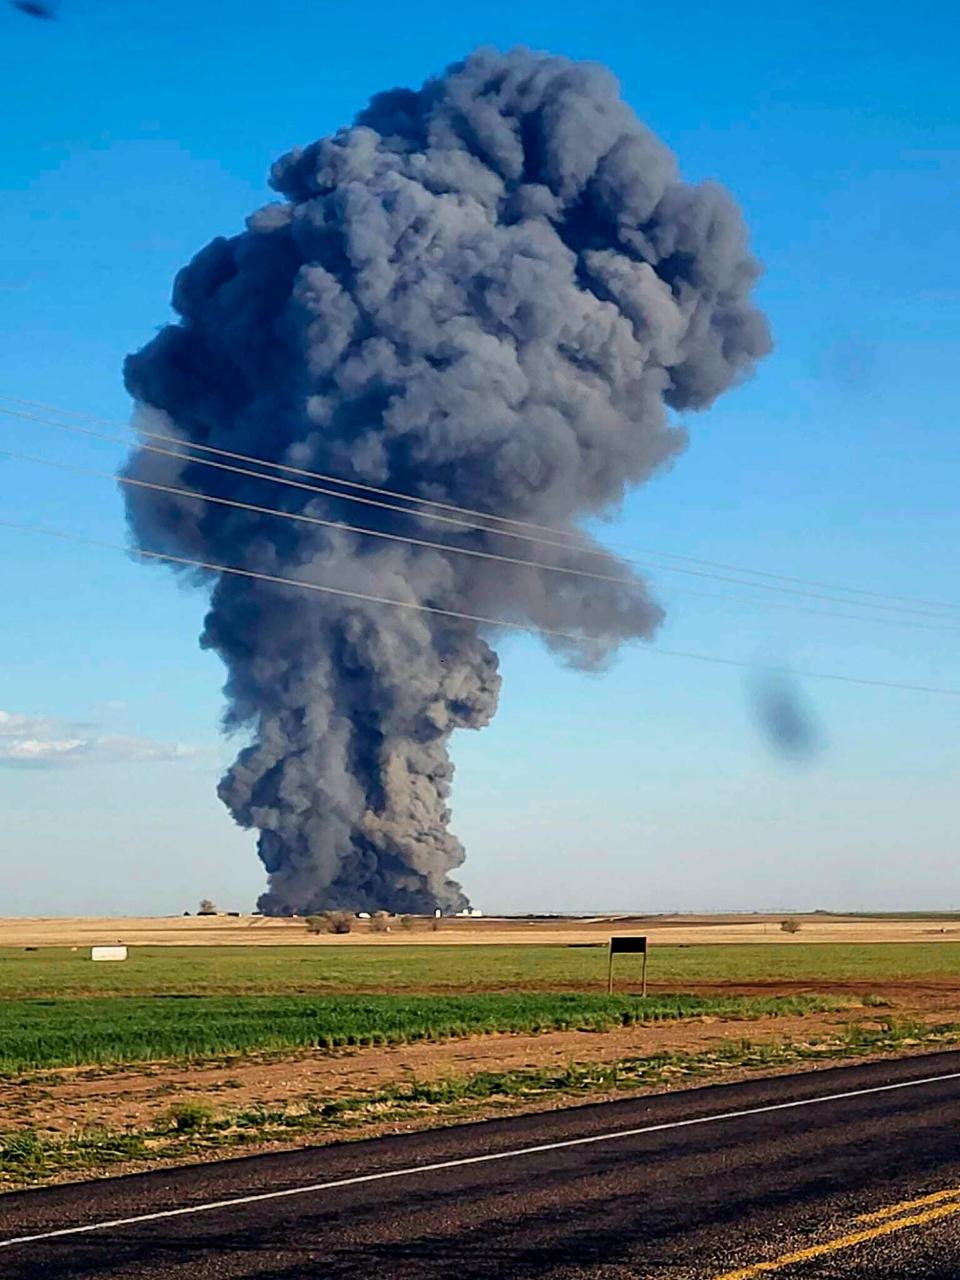 Smoke fills the sky after an explosion and fire at the Southfork Dairy Farms near Dimmitt, Texas, on Monday, April 10, 2023. The explosion at the dairy farm in the Texas Panhandle that critically injured one person and killed an estimated 18,000 head of cattle is the deadliest barn fire recorded since the Animal Welfare Institute began tracking the fires.